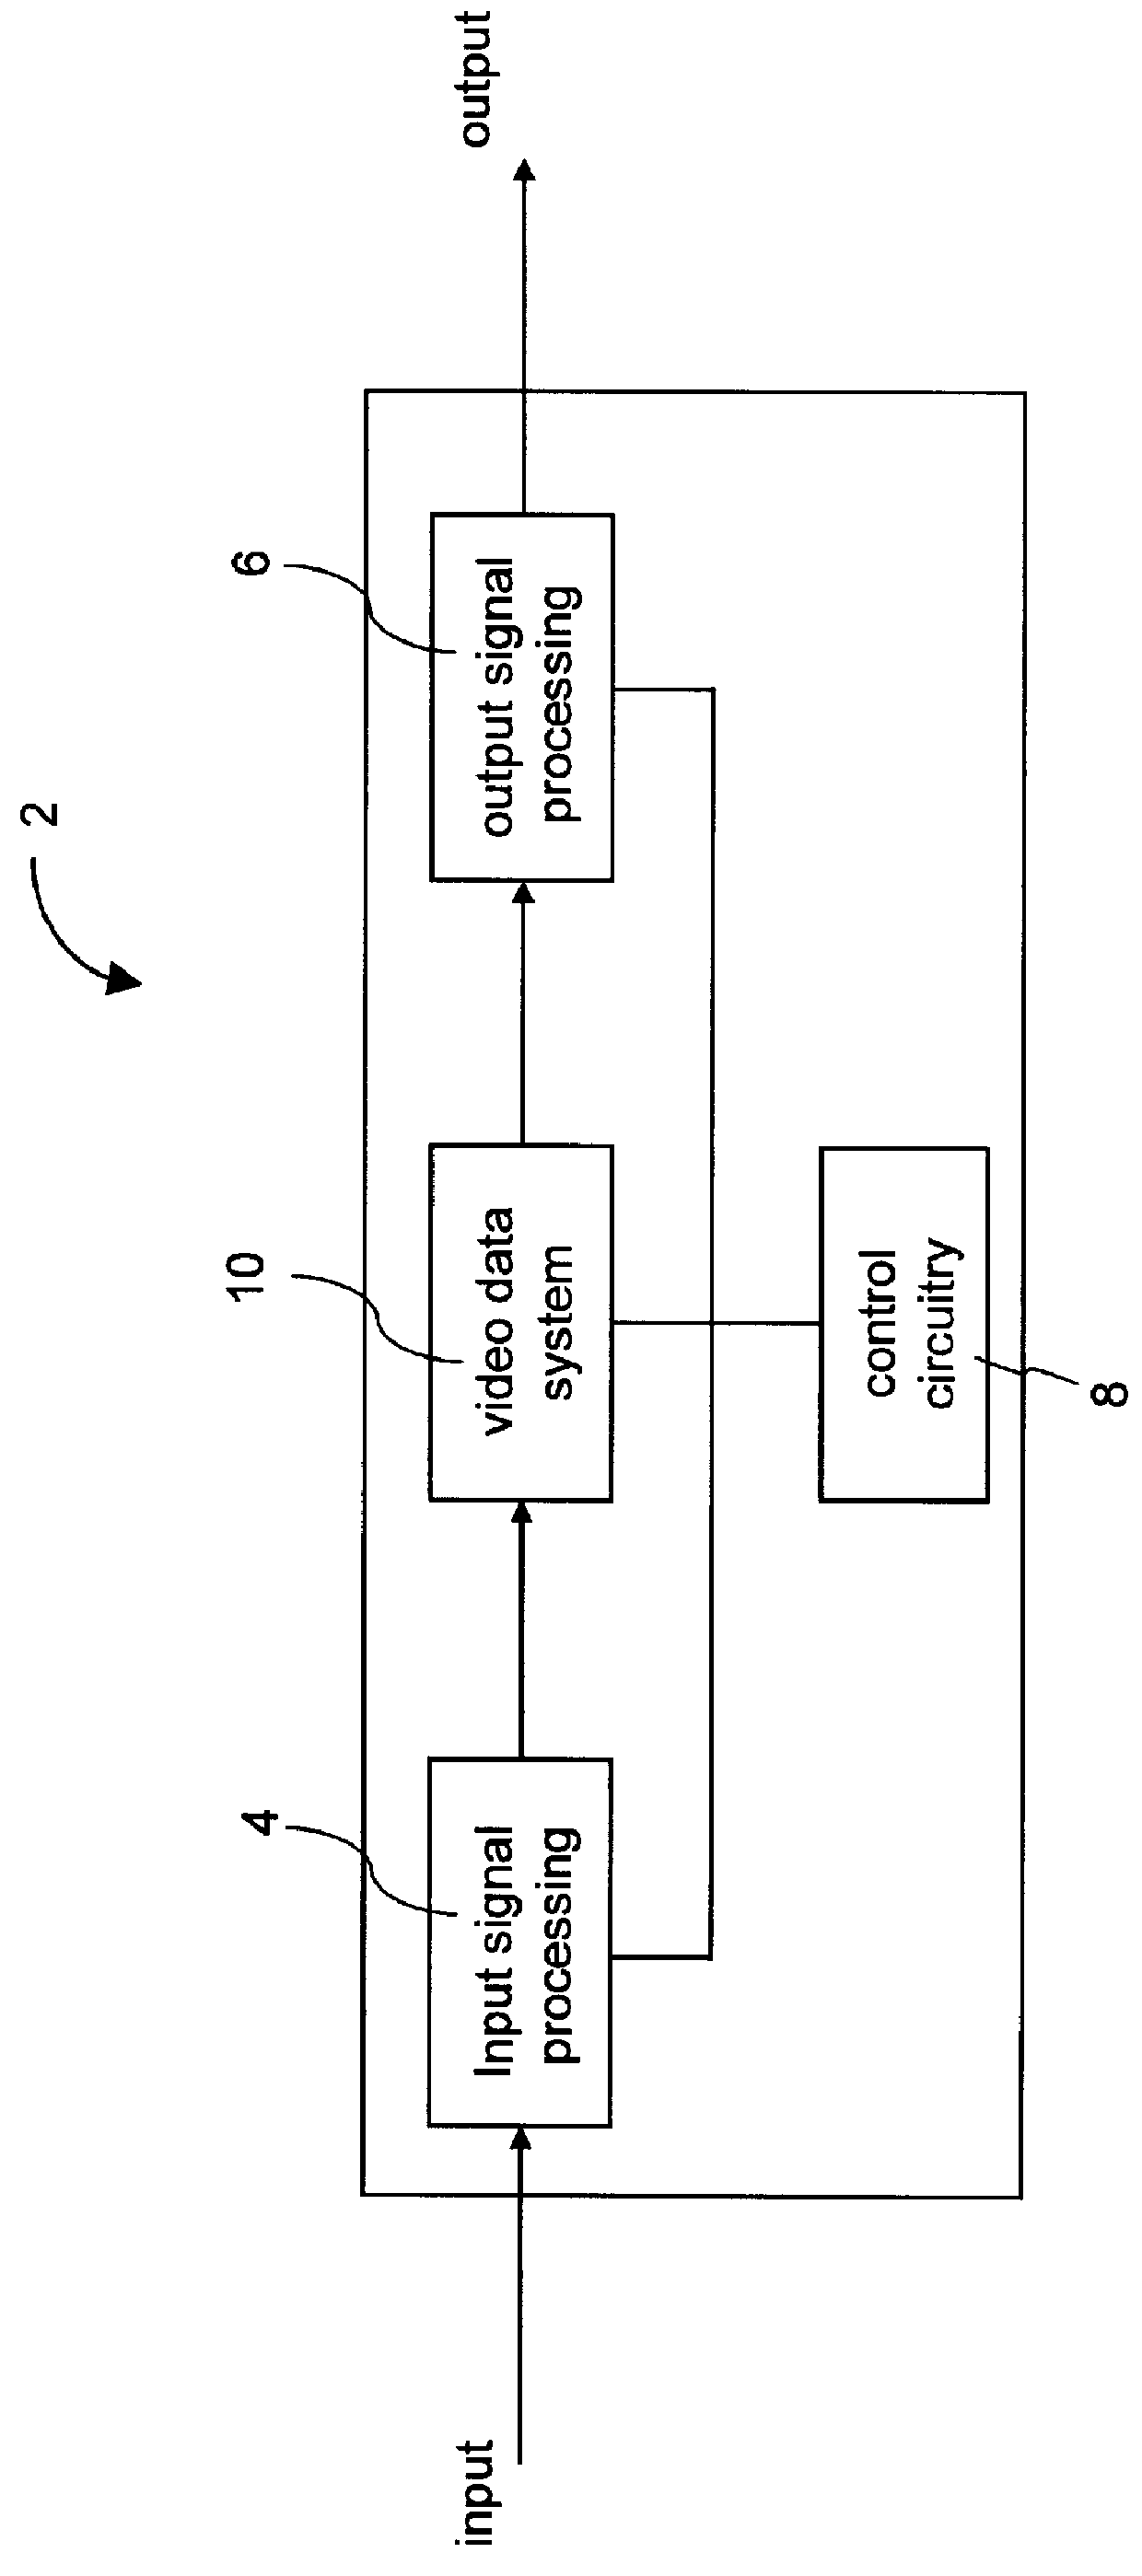 Method and apparatus for reducing video data memory in converting VGA signals to TV signals